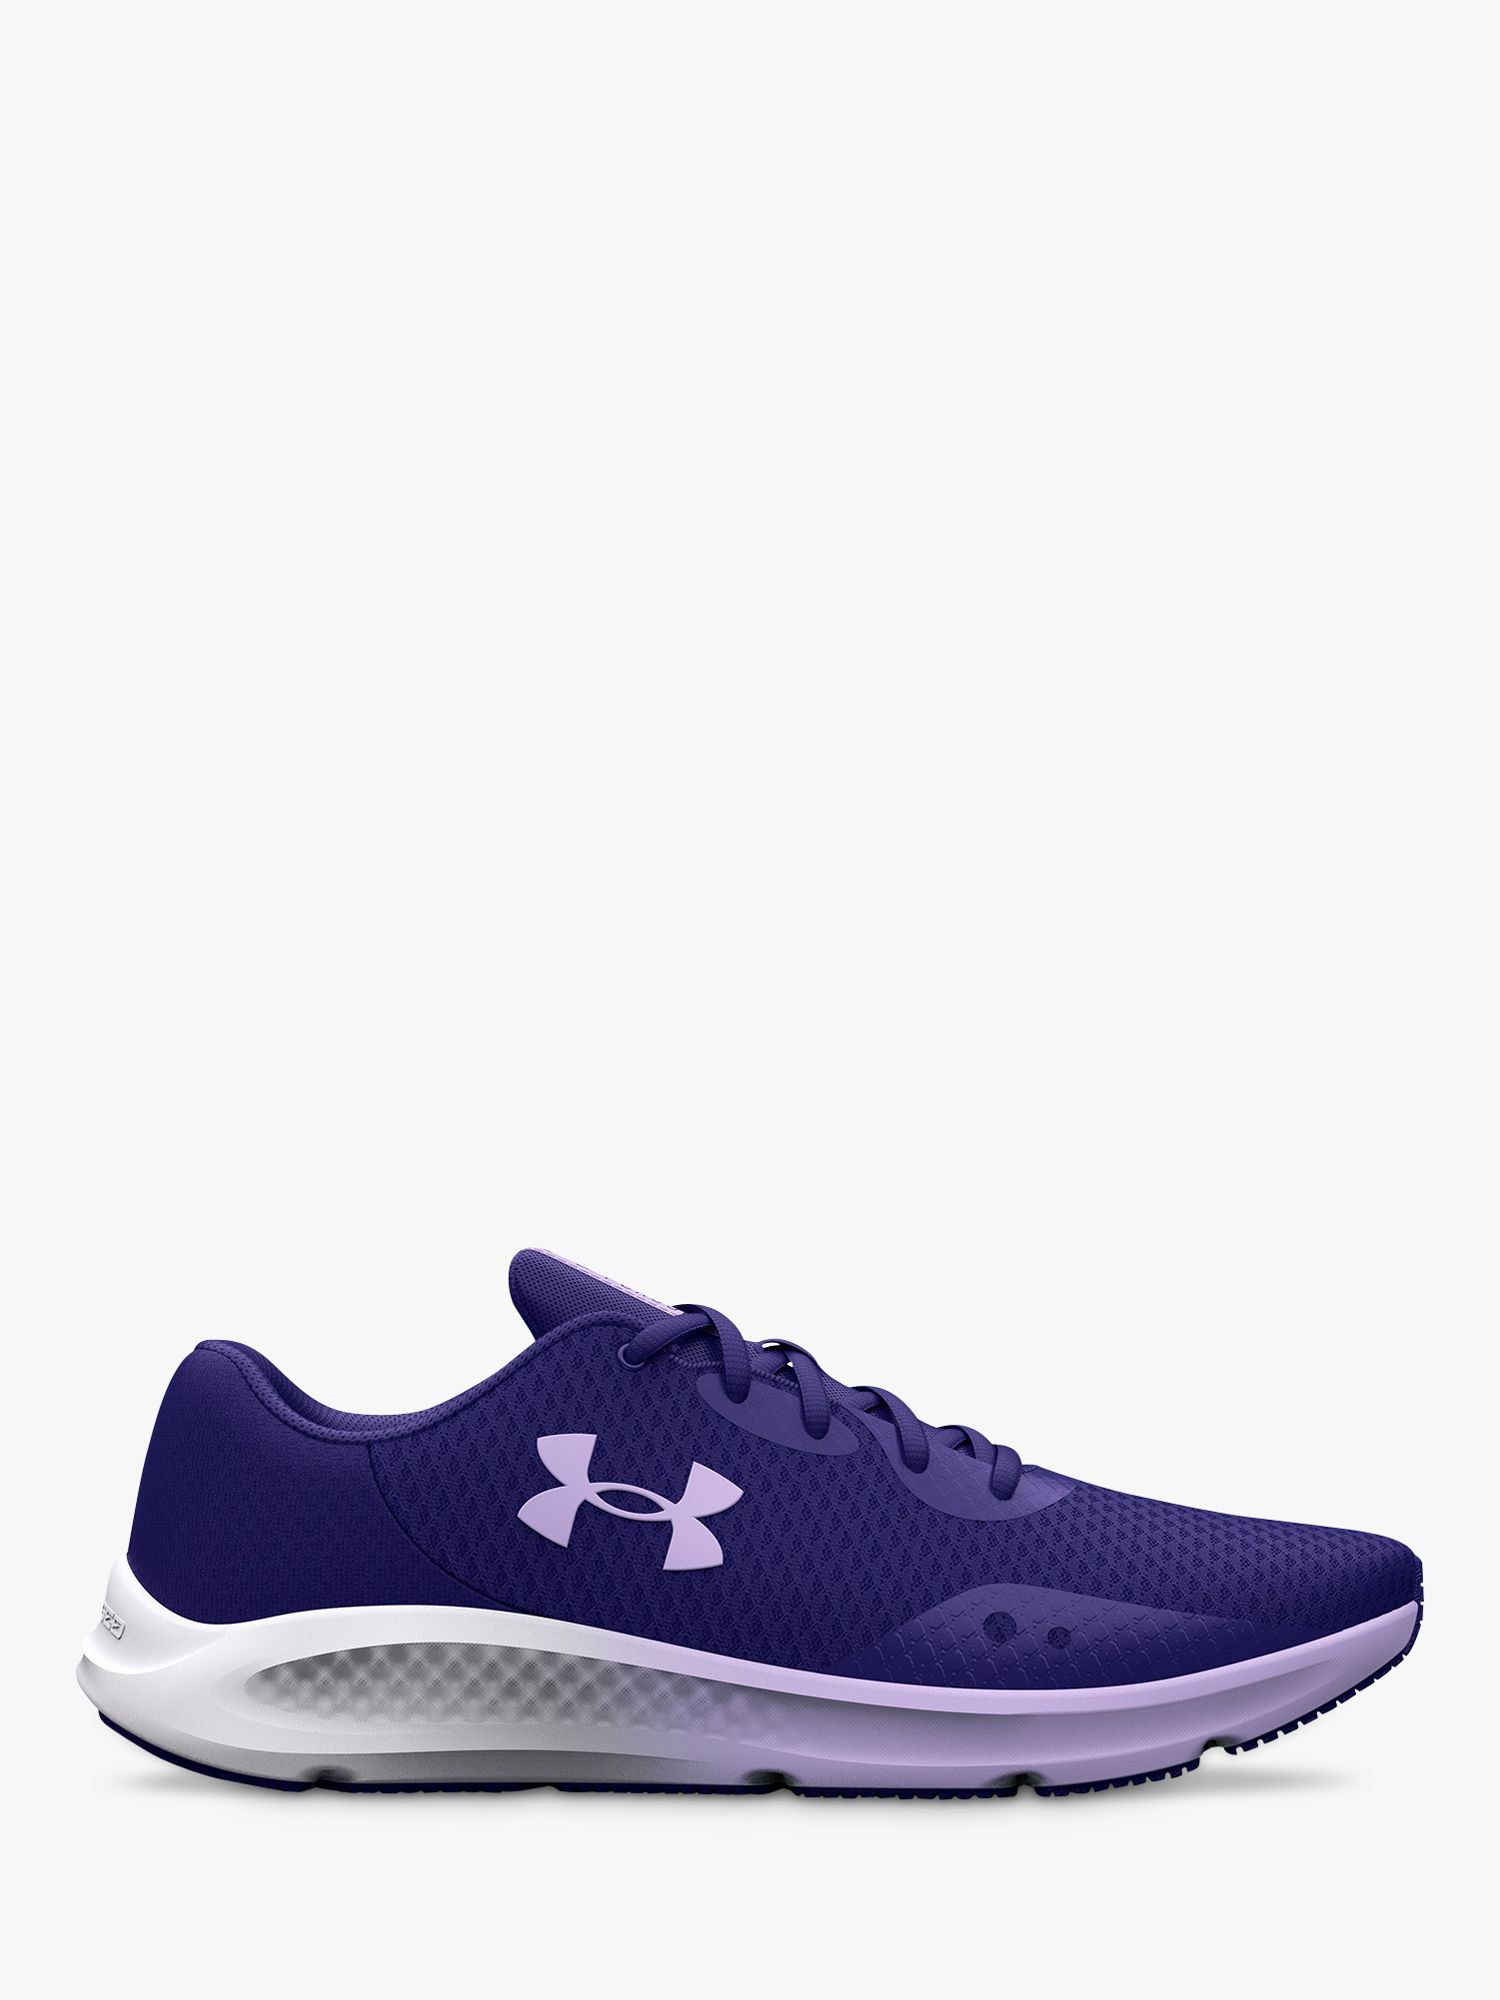 Under Armour Charged Pursuit 3 Women's Running Shoes, Sonar Blue/Purple, 4